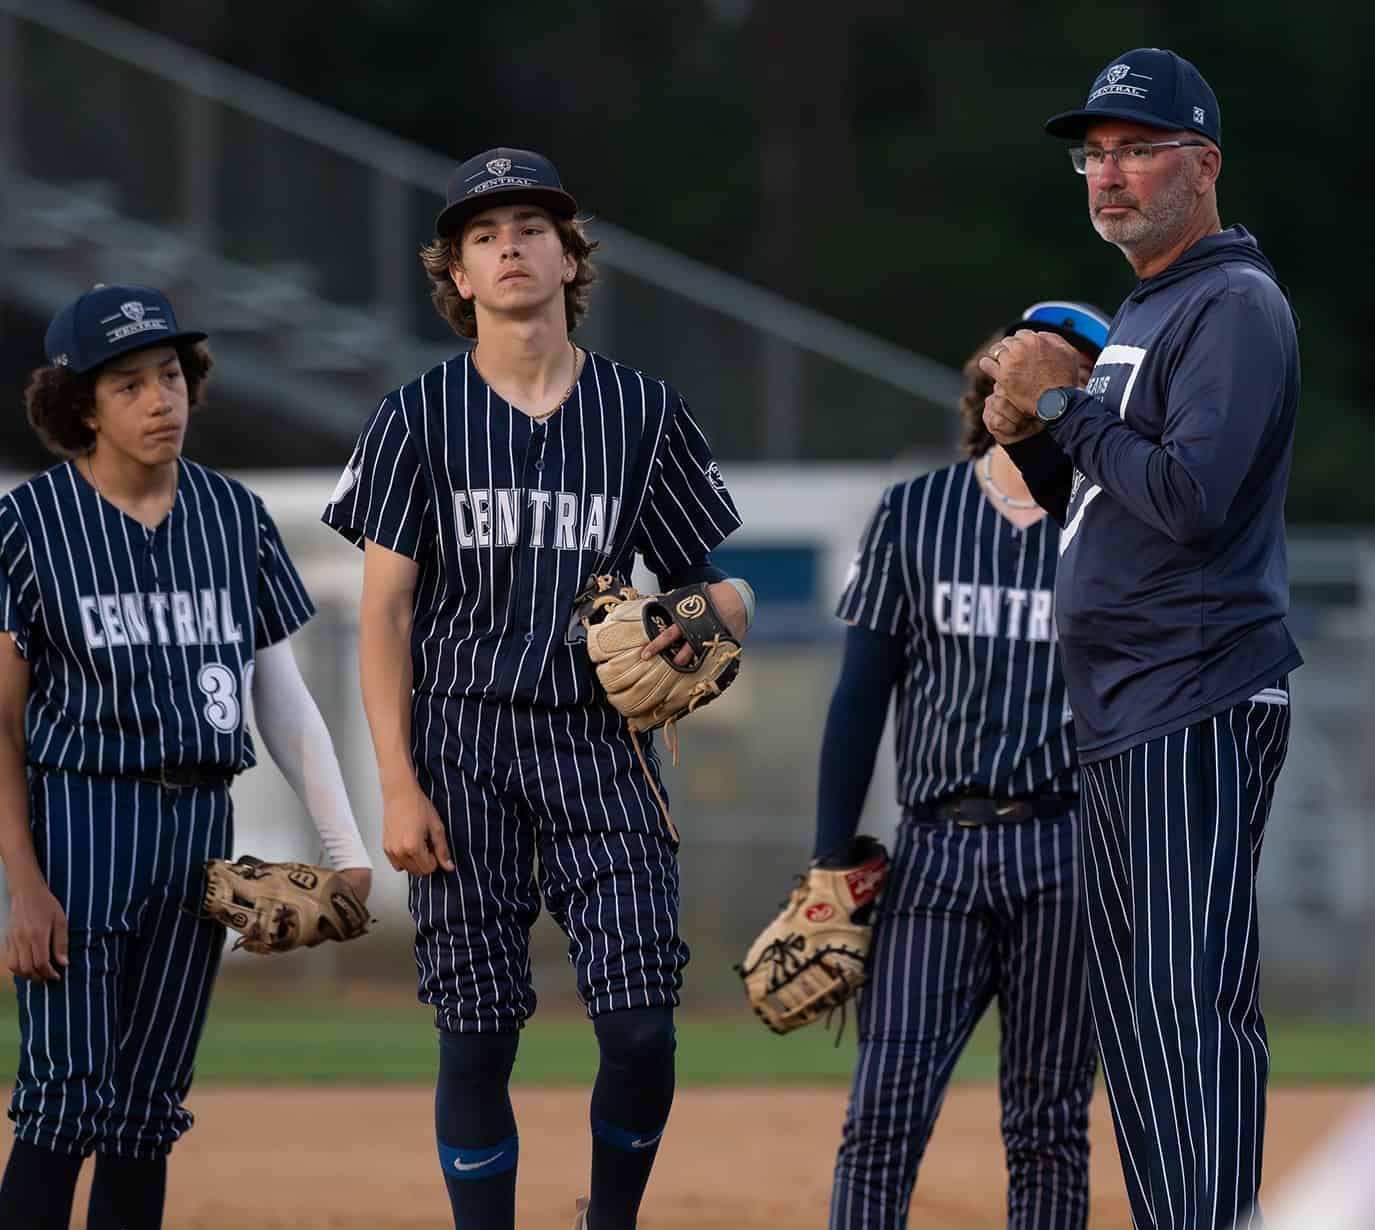 Central High Head Coach Al Sorrentino waits on the mound during a pitching change in the game against visiting Hernando High Friday. Also pictured Korbin Baskind, center, and 36, Jacob Lugo. Photo by [Joseph Dicristofalo]